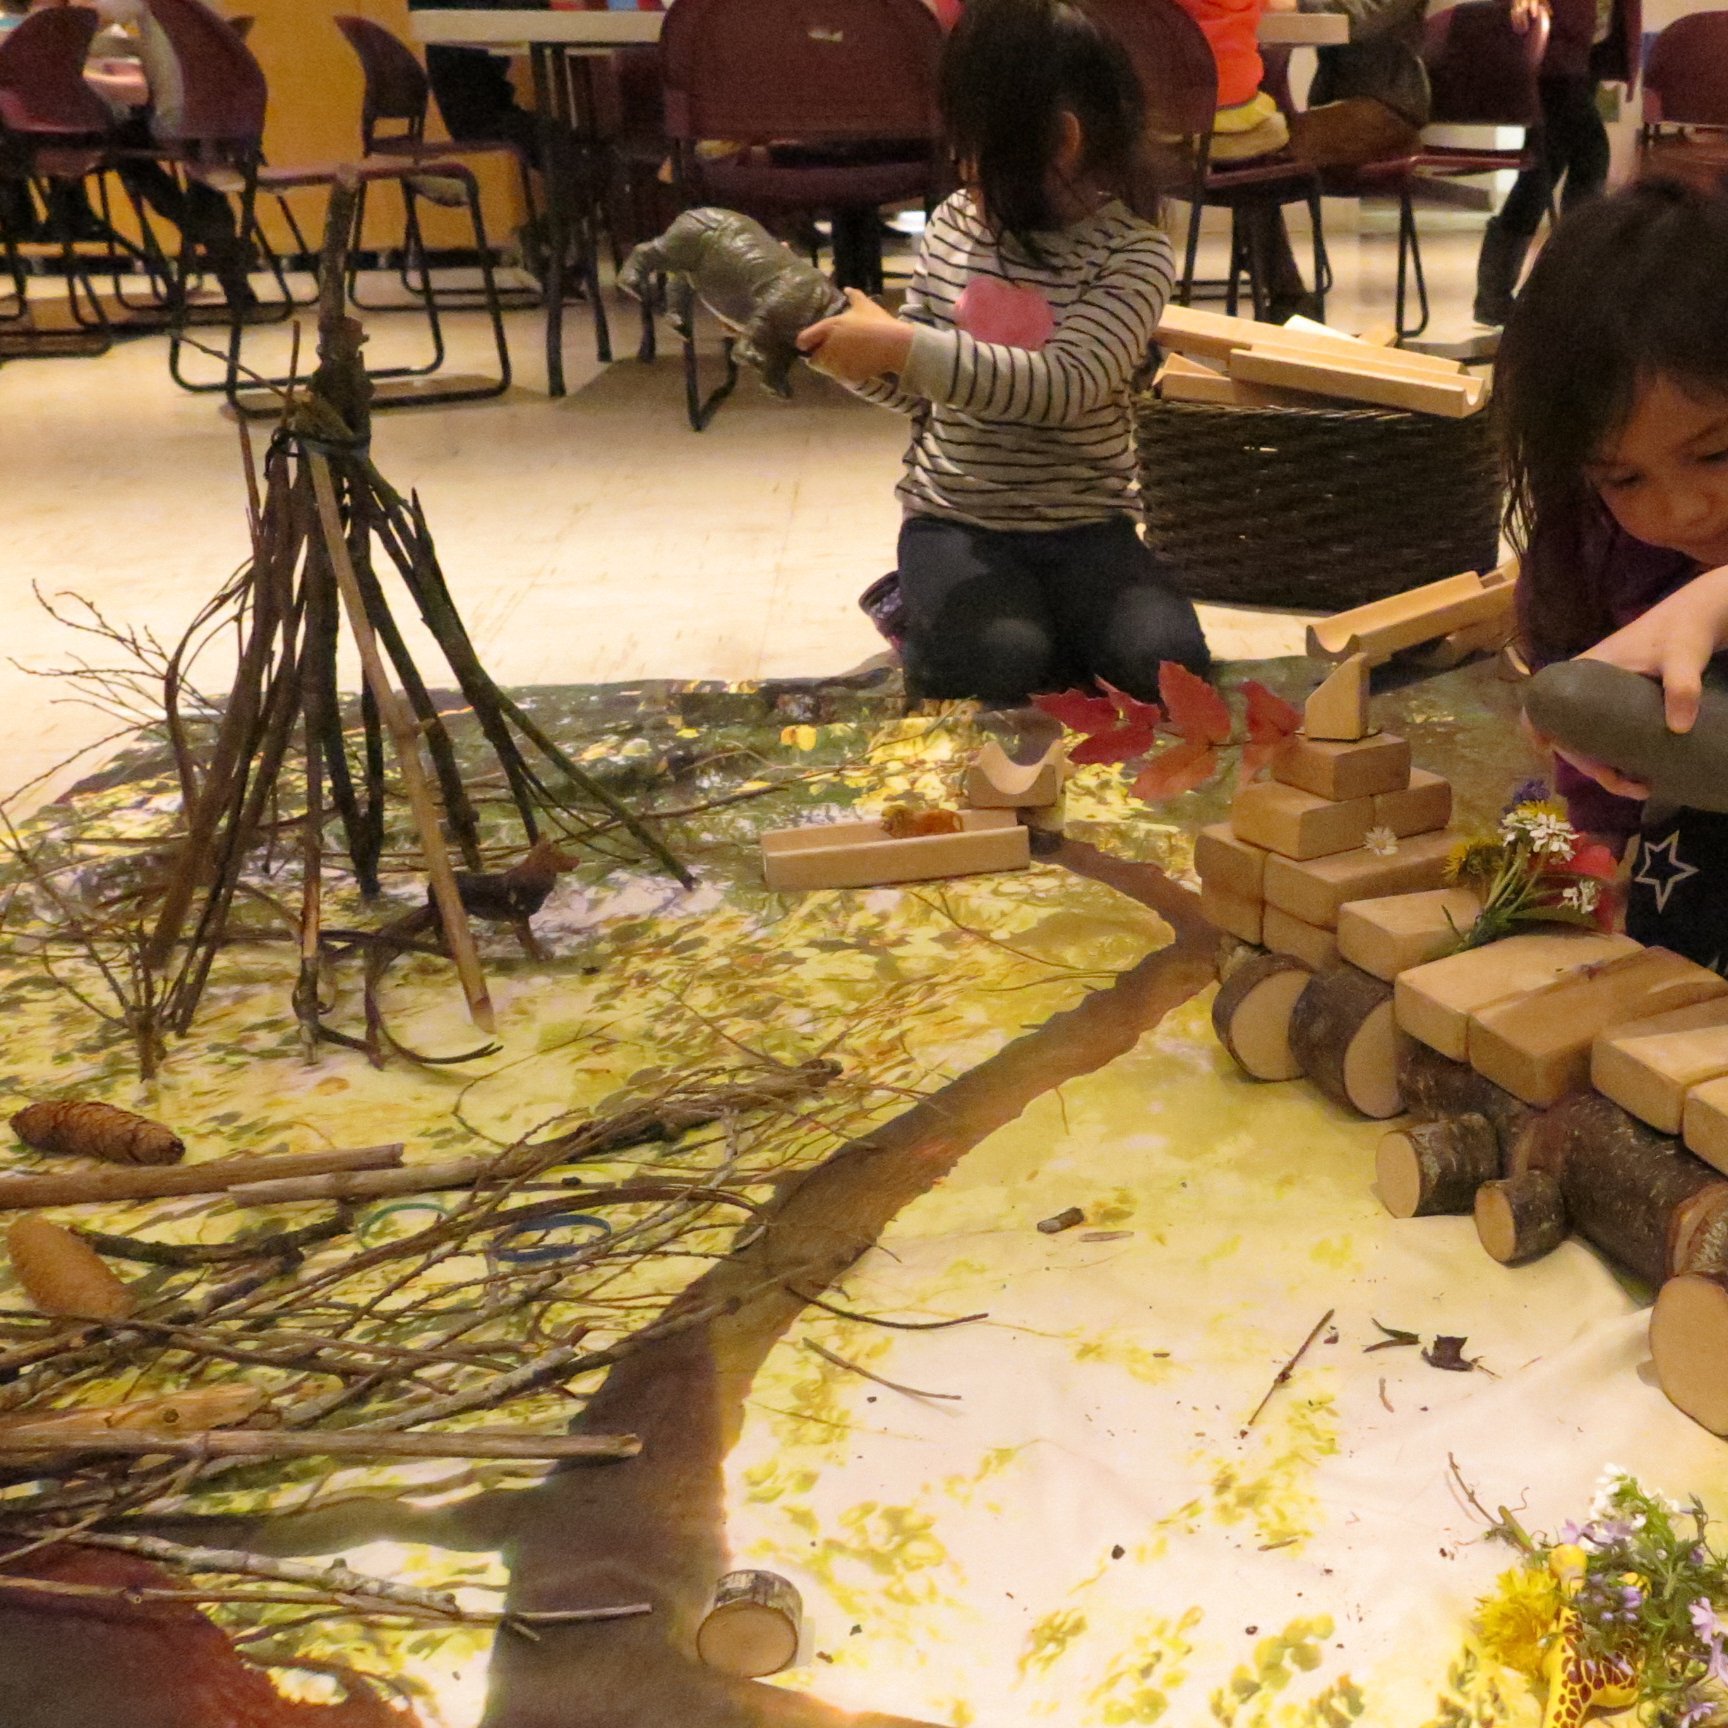 Frog Hollow Reggio- inspired Learning Centre's intent is to bring the Reggio inspired community together and provide professional development opportunities